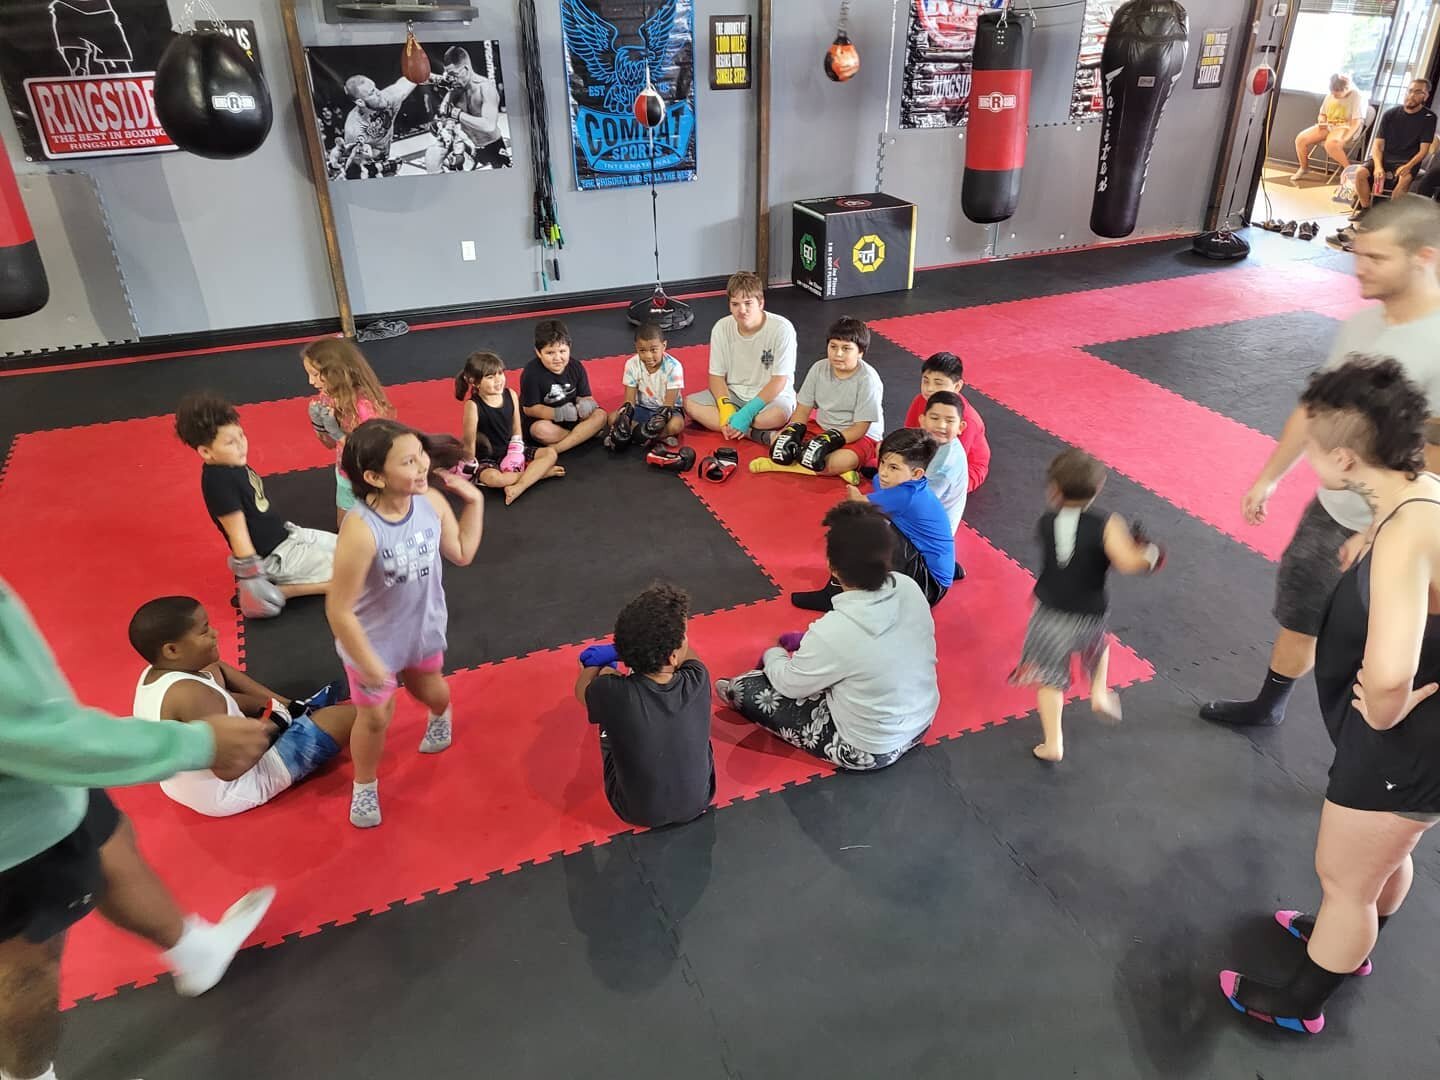 🦆🐥🦆🐥 Playing duck duck goose with the little warriors at the end of our training session. 

🎯Come in and join our Boxing &amp; Muay Thai kids class 4 days a week. 

Tuesday and Thursday 4:45pm to 5:45pm 
  Saturday and Sunday 10am to 11am 

#kid